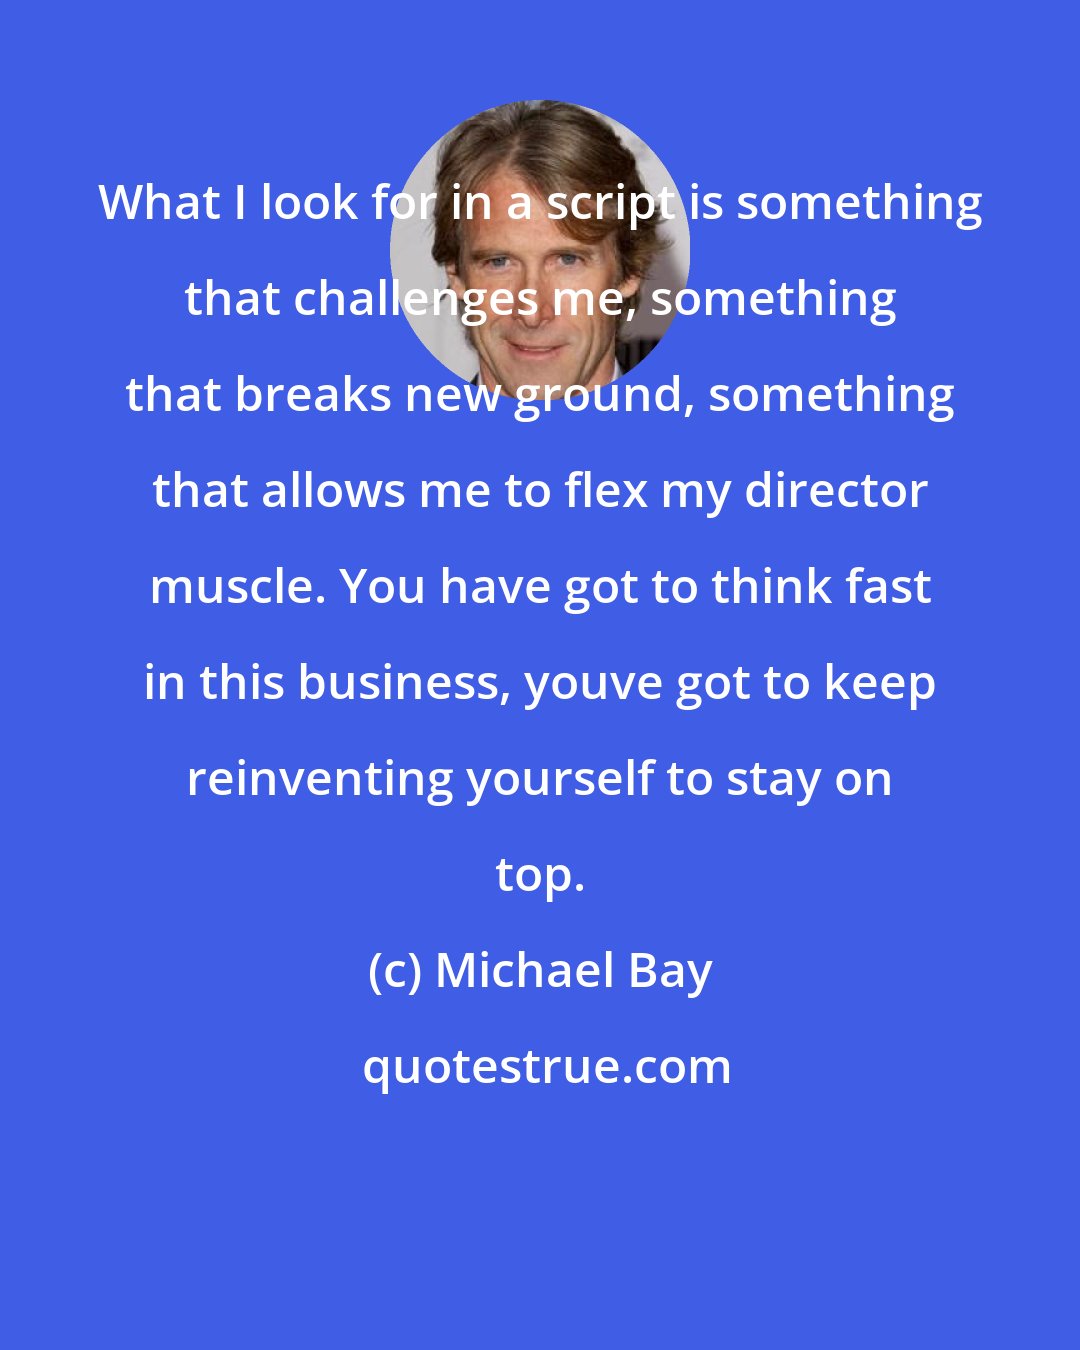 Michael Bay: What I look for in a script is something that challenges me, something that breaks new ground, something that allows me to flex my director muscle. You have got to think fast in this business, youve got to keep reinventing yourself to stay on top.